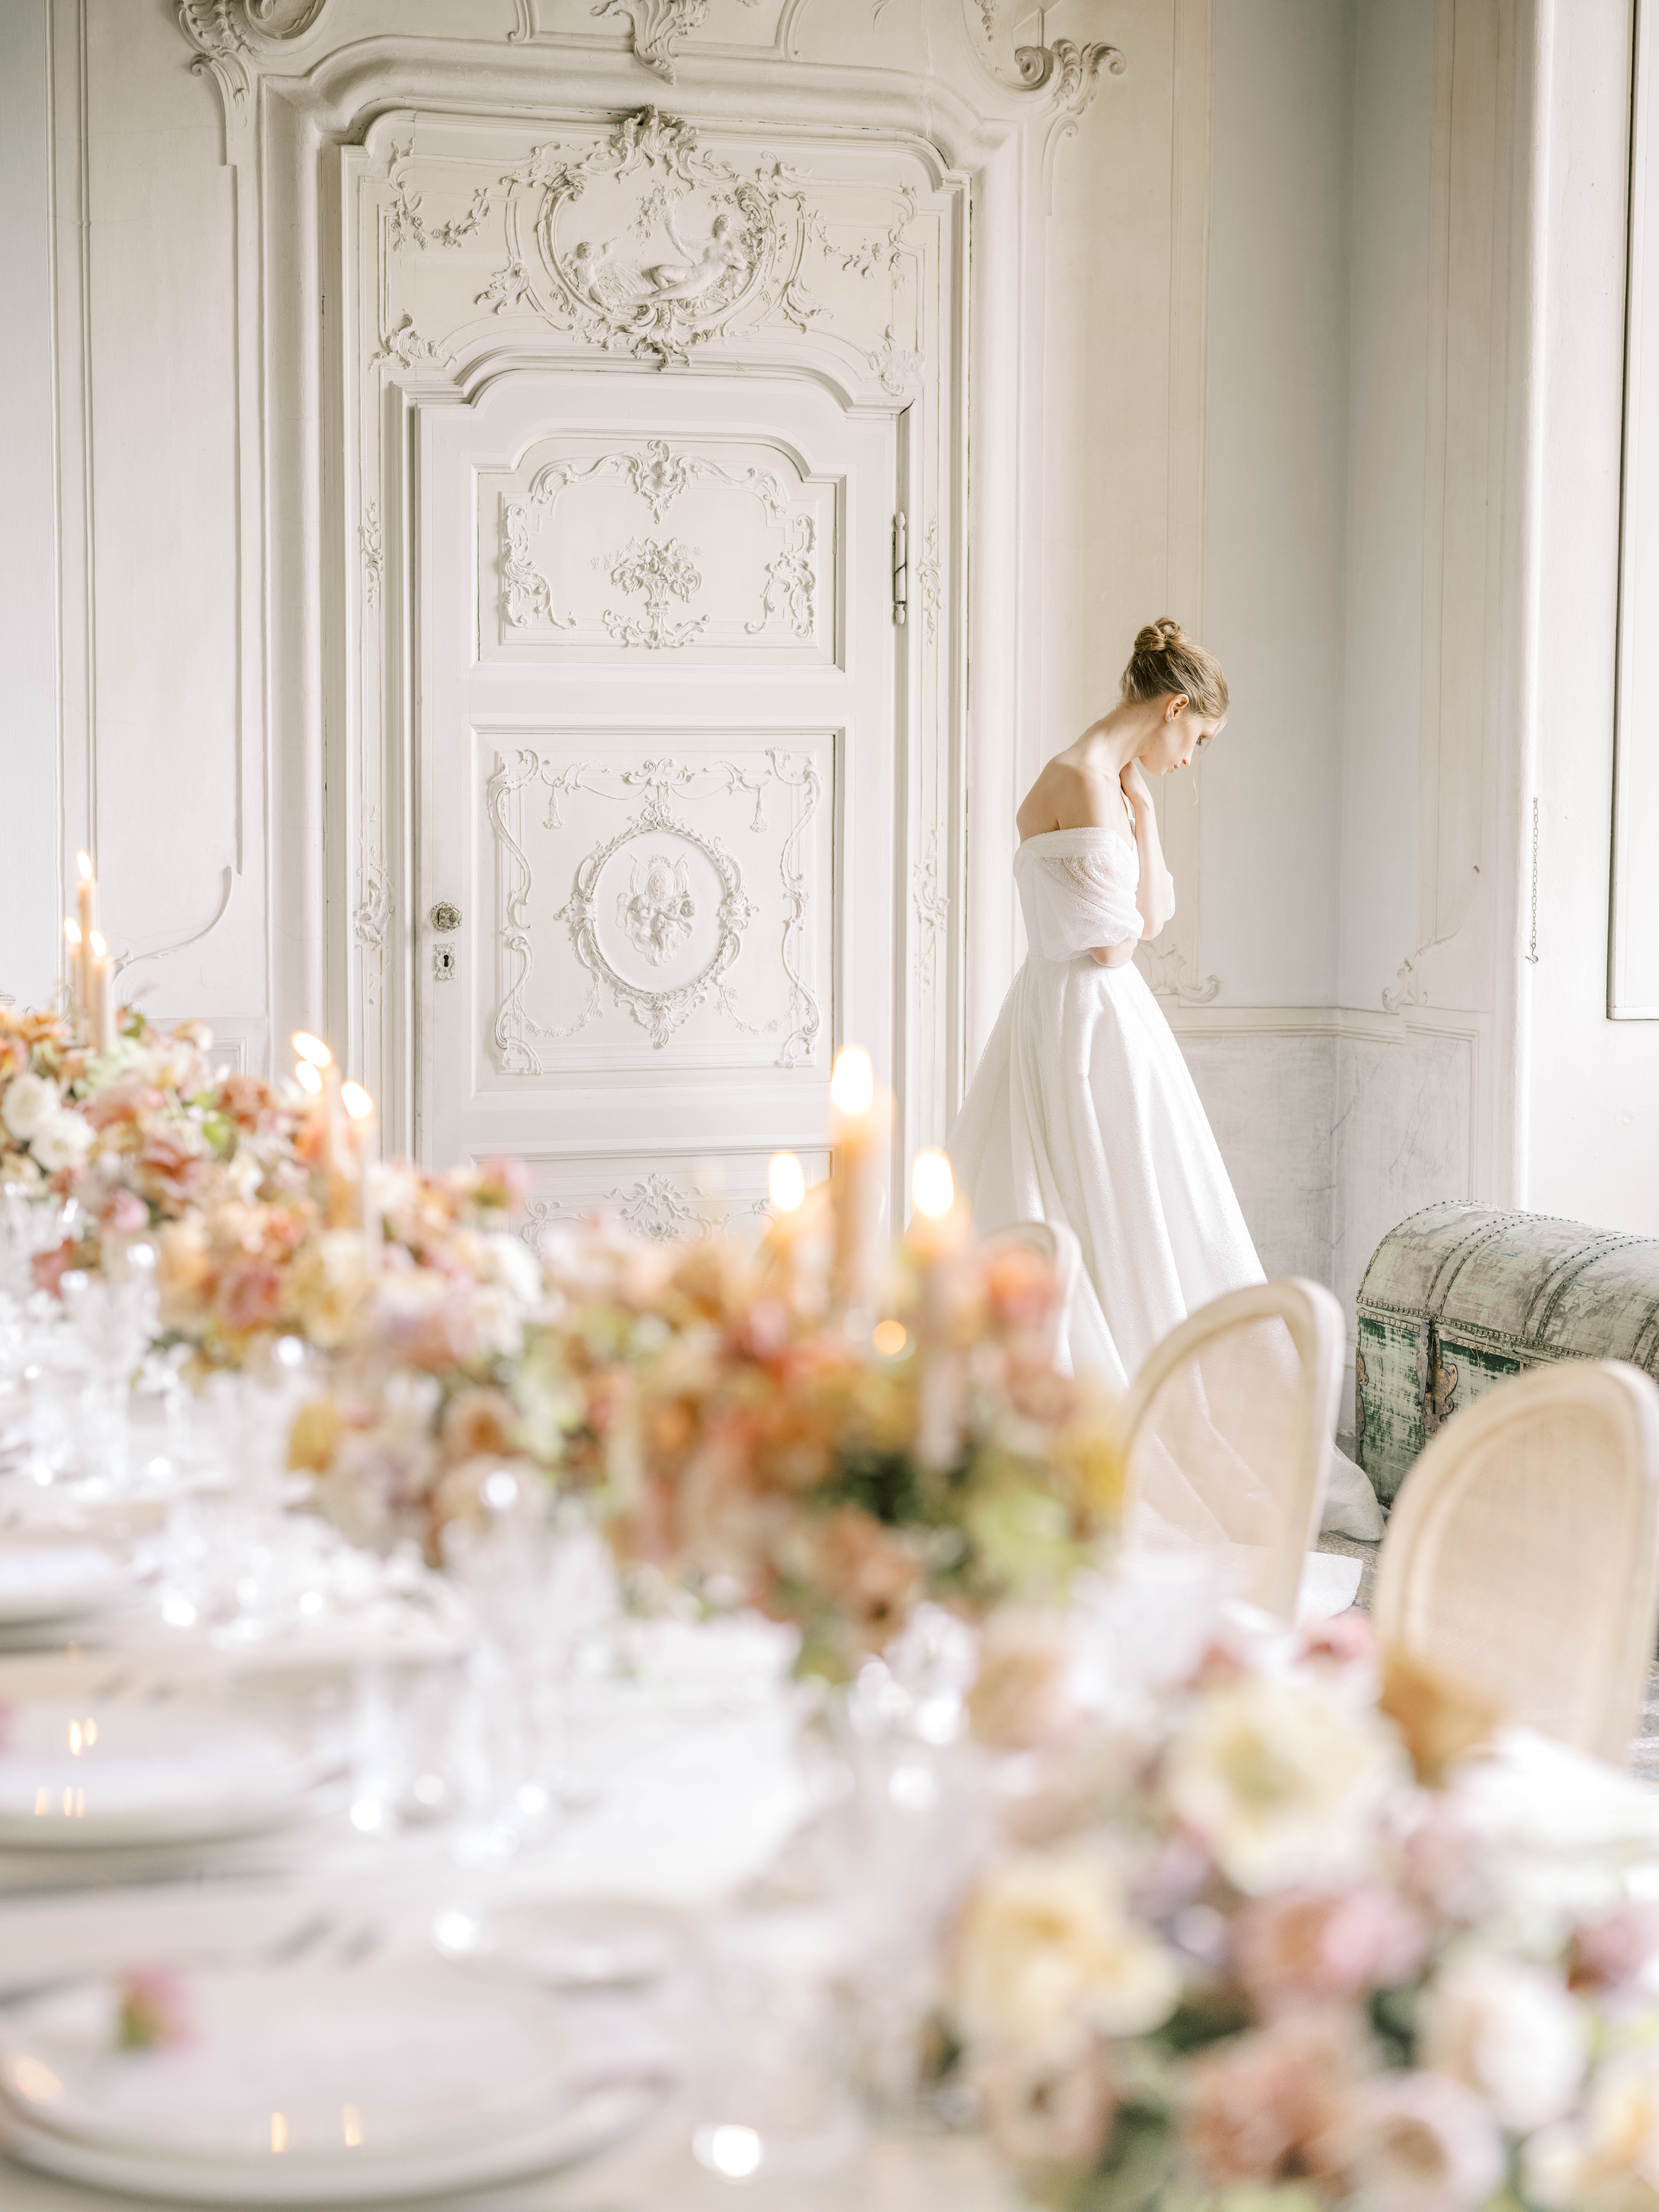 Villa Sola Cabiati Luxury wedding. Photographed by Italy wedding photographer, Amy Mulder Photography. Bride on stairs inside the villa. Bride inside the villa in the stucco room where wedding reception is held. Table is in the foreground with bride in the background.